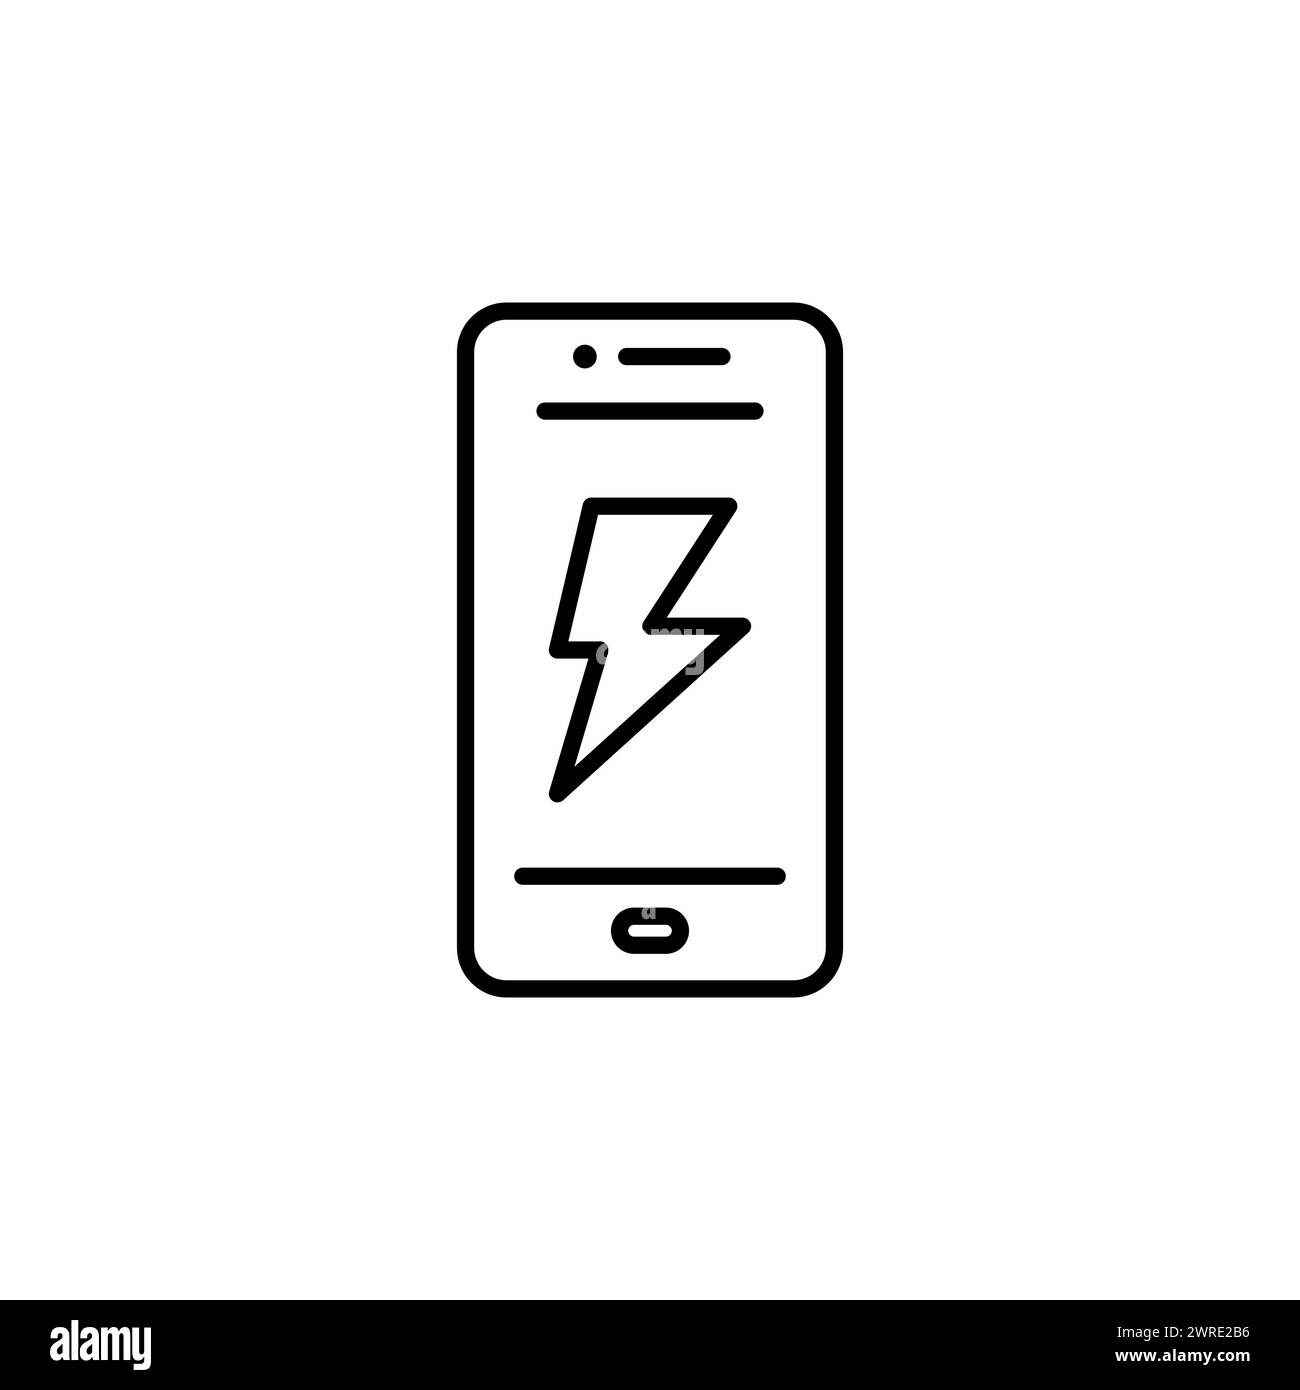 Phone charging icon. Vector illustration isolated on white background. Stock Vector